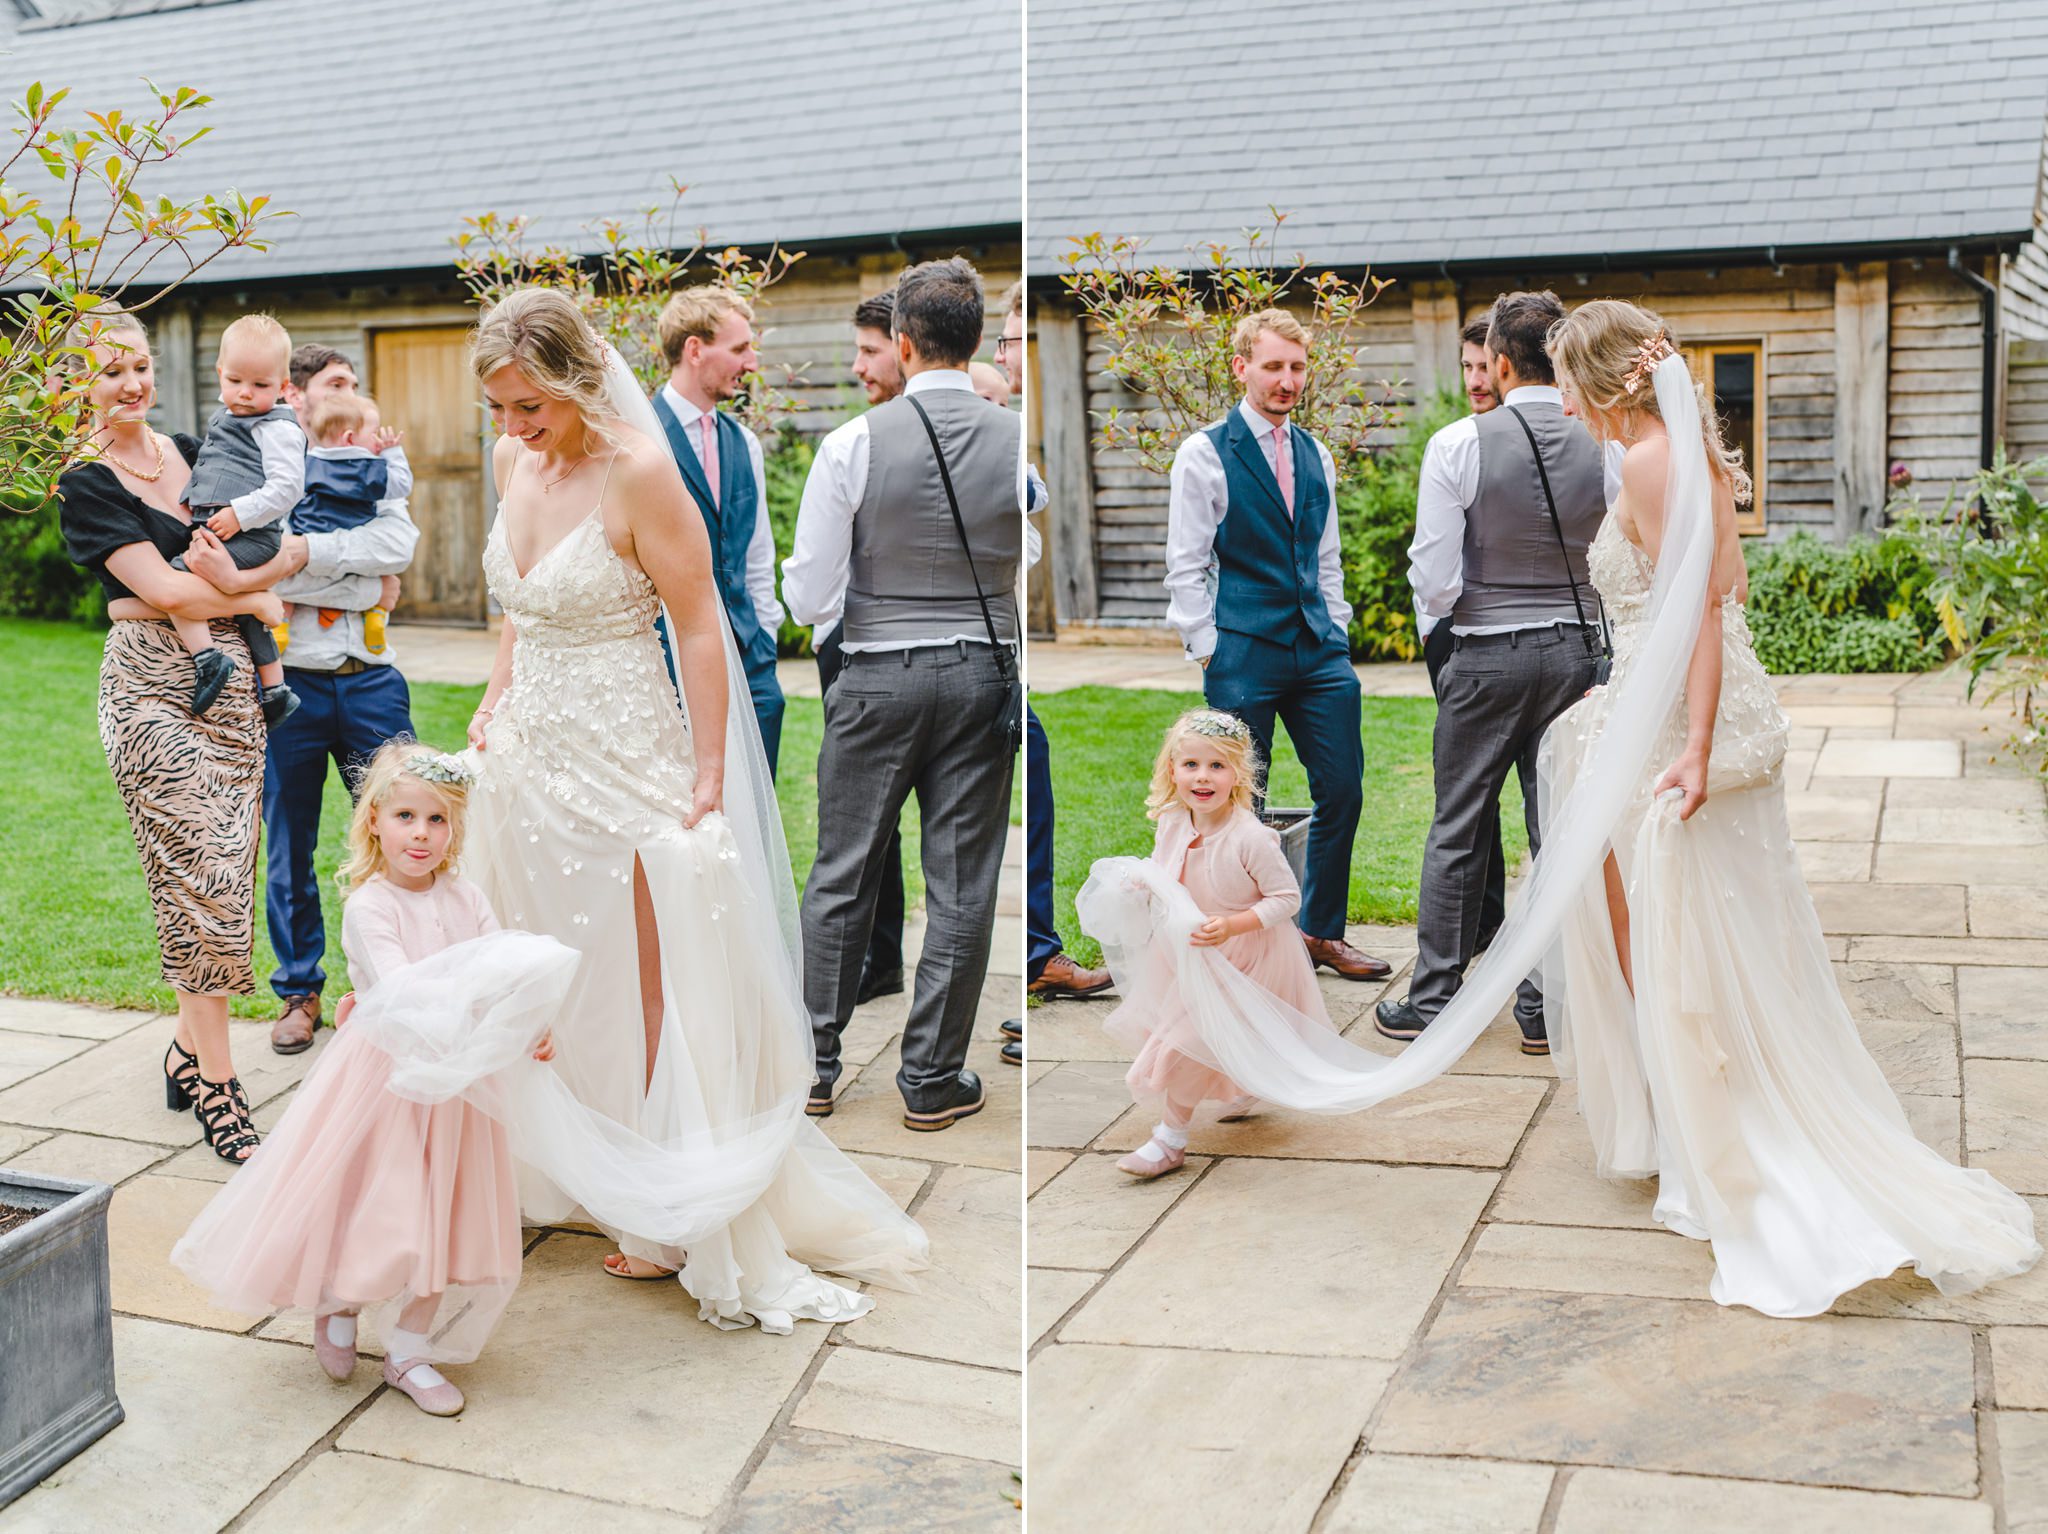 A bridesmaid playing with the brides dress